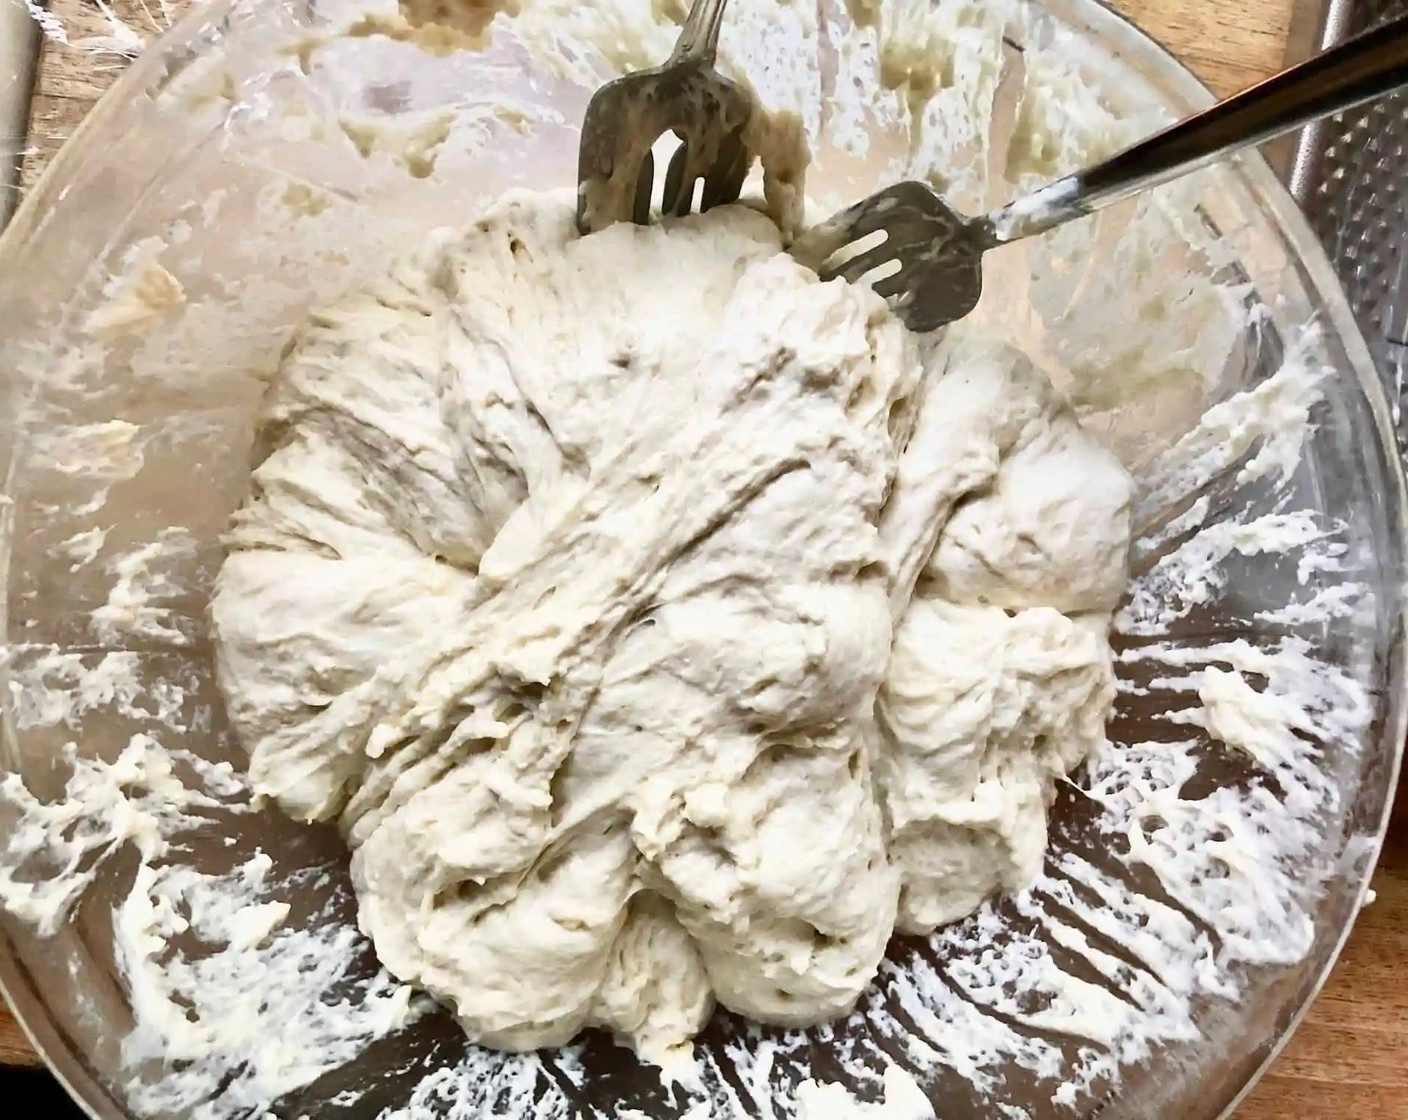 step 4 Using two forks, deflate the dough by releasing it from the sides of the bowl and pulling it toward the center. Rotate the bowl quarter turns as you deflate, turning the mass into a rough ball.